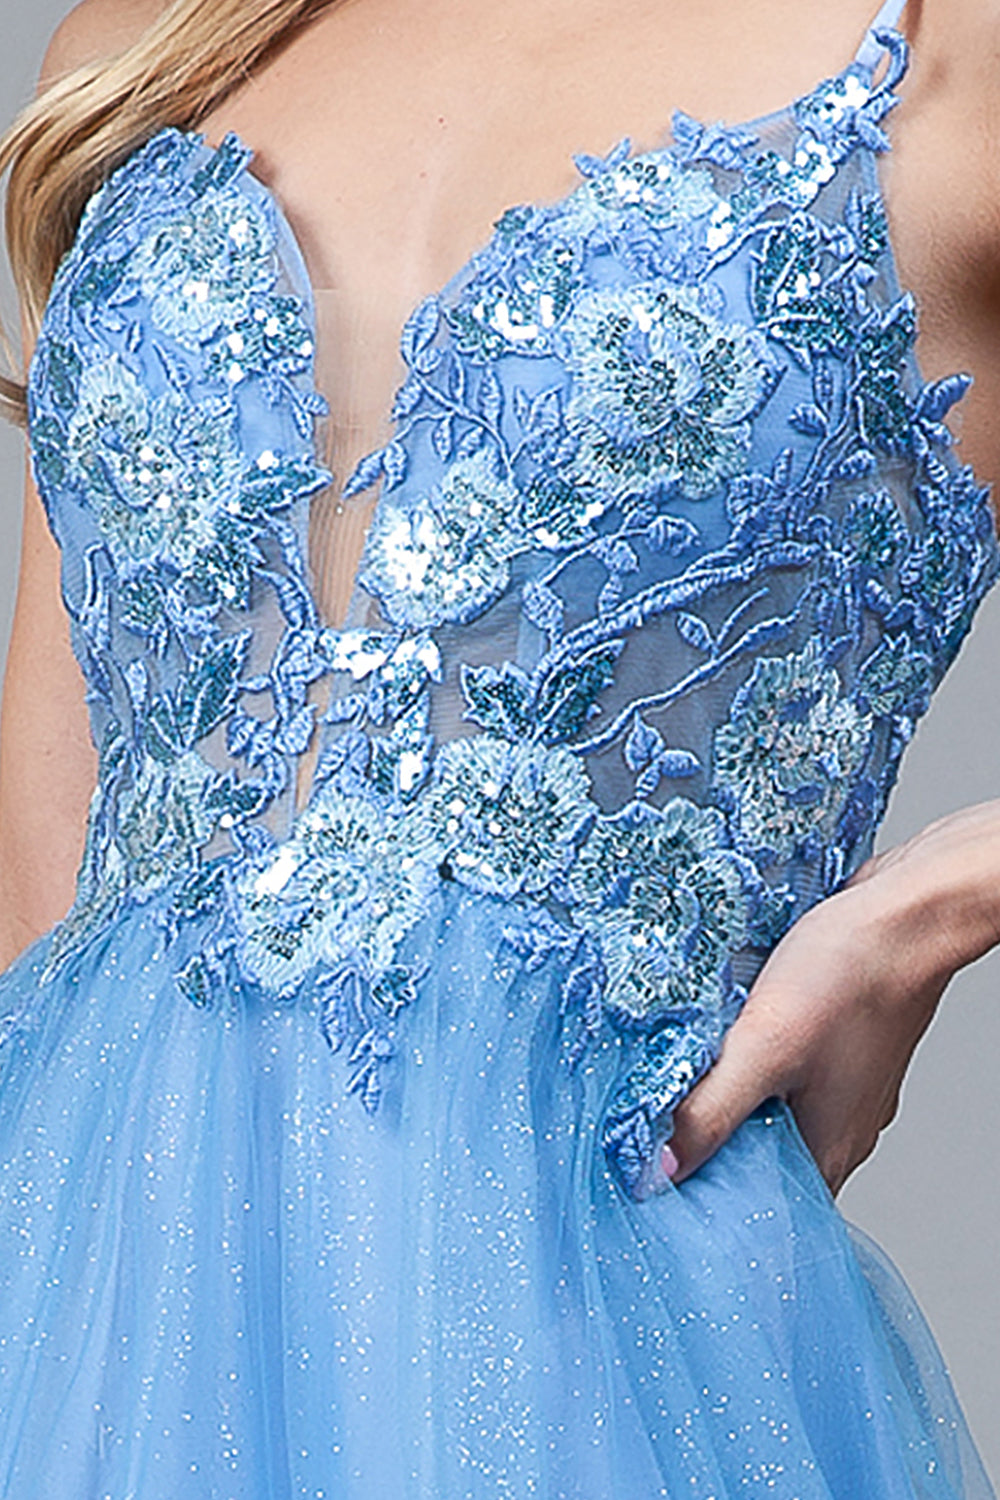 Ethereal Spaghetti Strap Floral Appliqued Ballgown